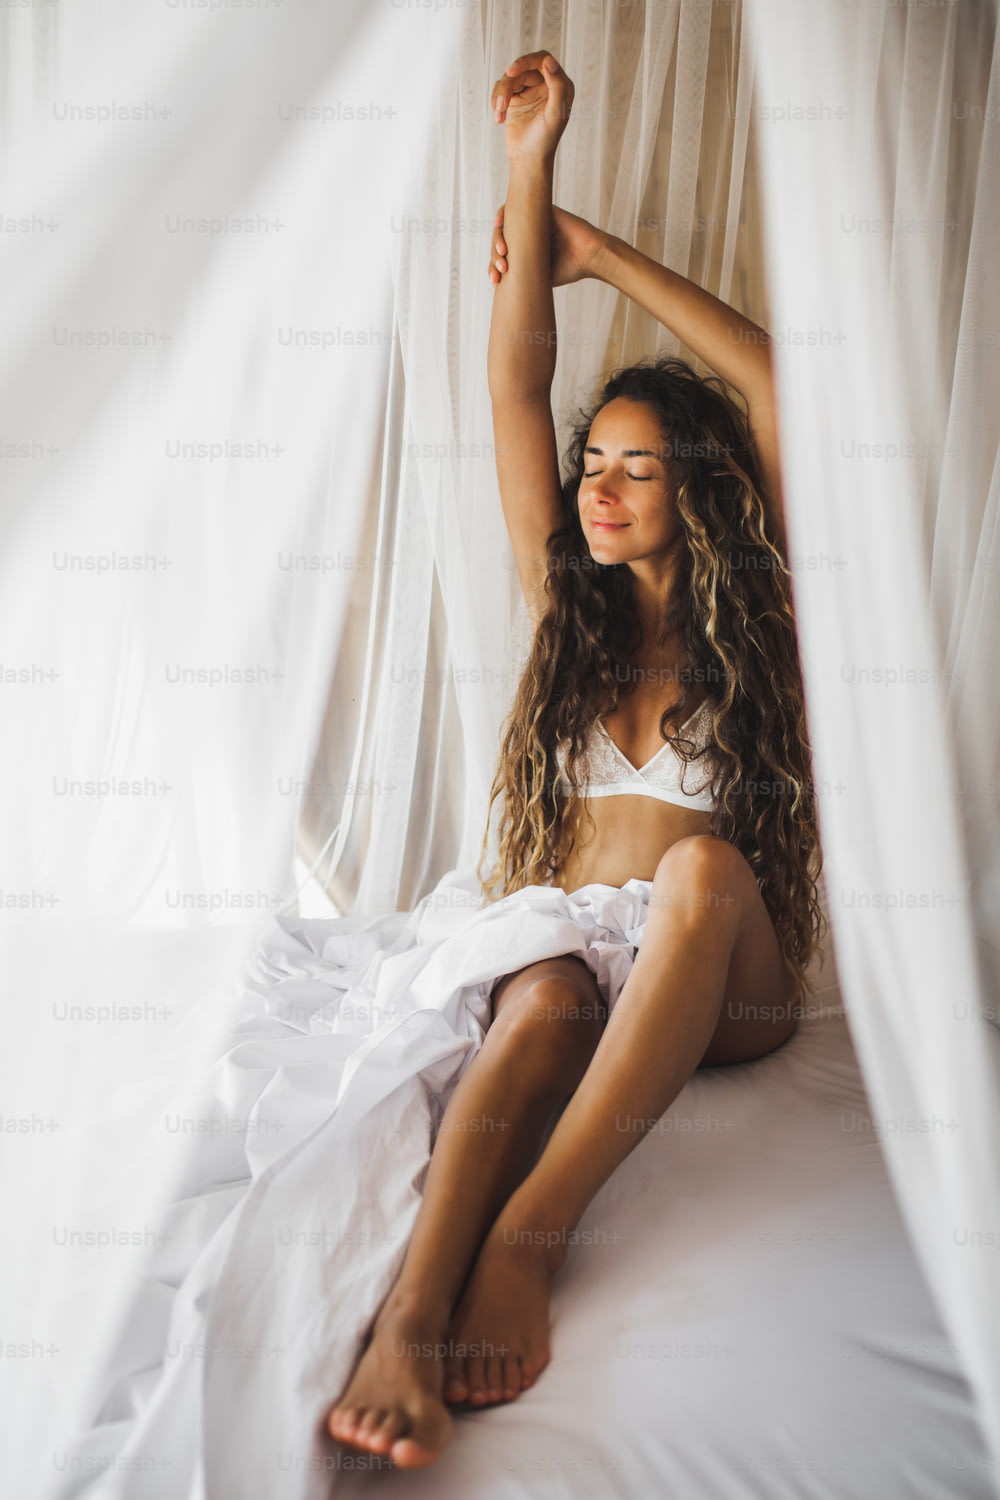 Beautiful tanned young woman awakening in white bed. Happy wake up and start new day. Leisure and rest. Wellbeing and carefree  concept. Long curly hair. Stay home.